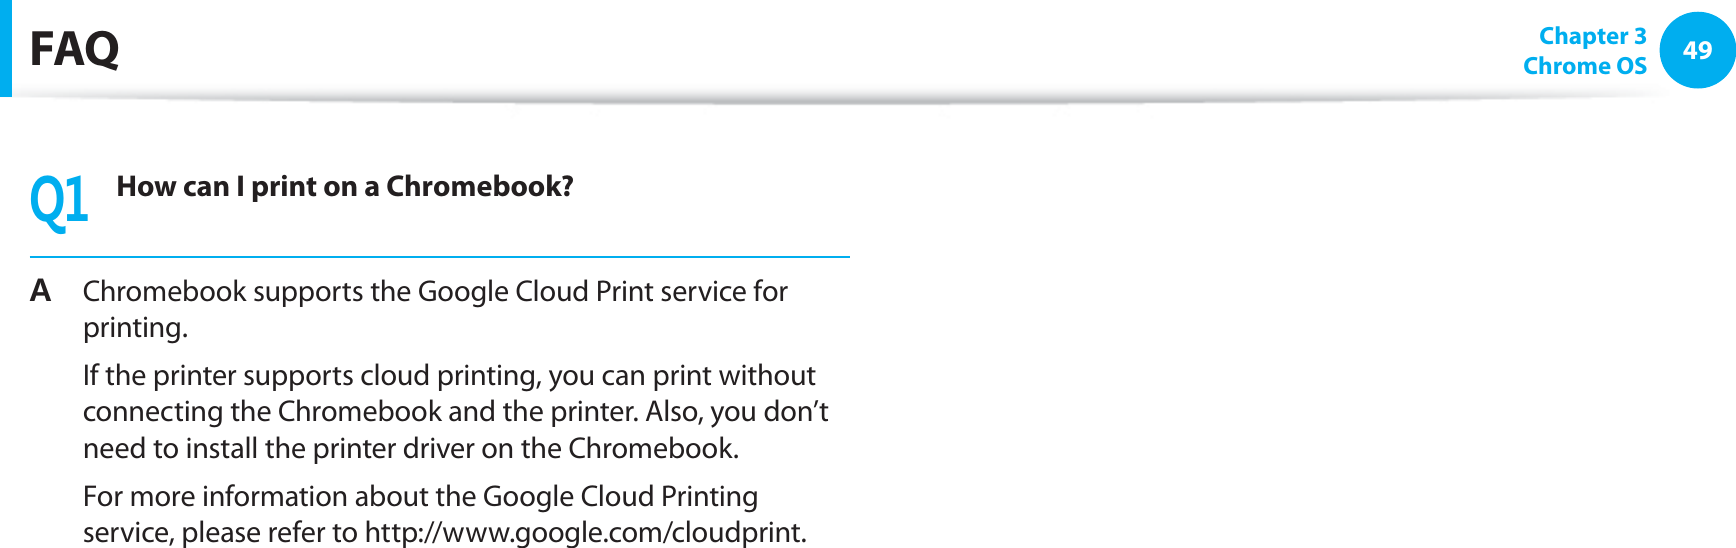 49Chapter 3 Chrome OSFAQ3How can I print on a Chromebook?# Chromebook supports the Google Cloud Print service for printing.  If the printer supports cloud printing, you can print without connecting the Chromebook and the printer. Also, you don’t need to install the printer driver on the Chromebook.  For more information about the Google Cloud Printing service, please refer to http://www.google.com/cloudprint.